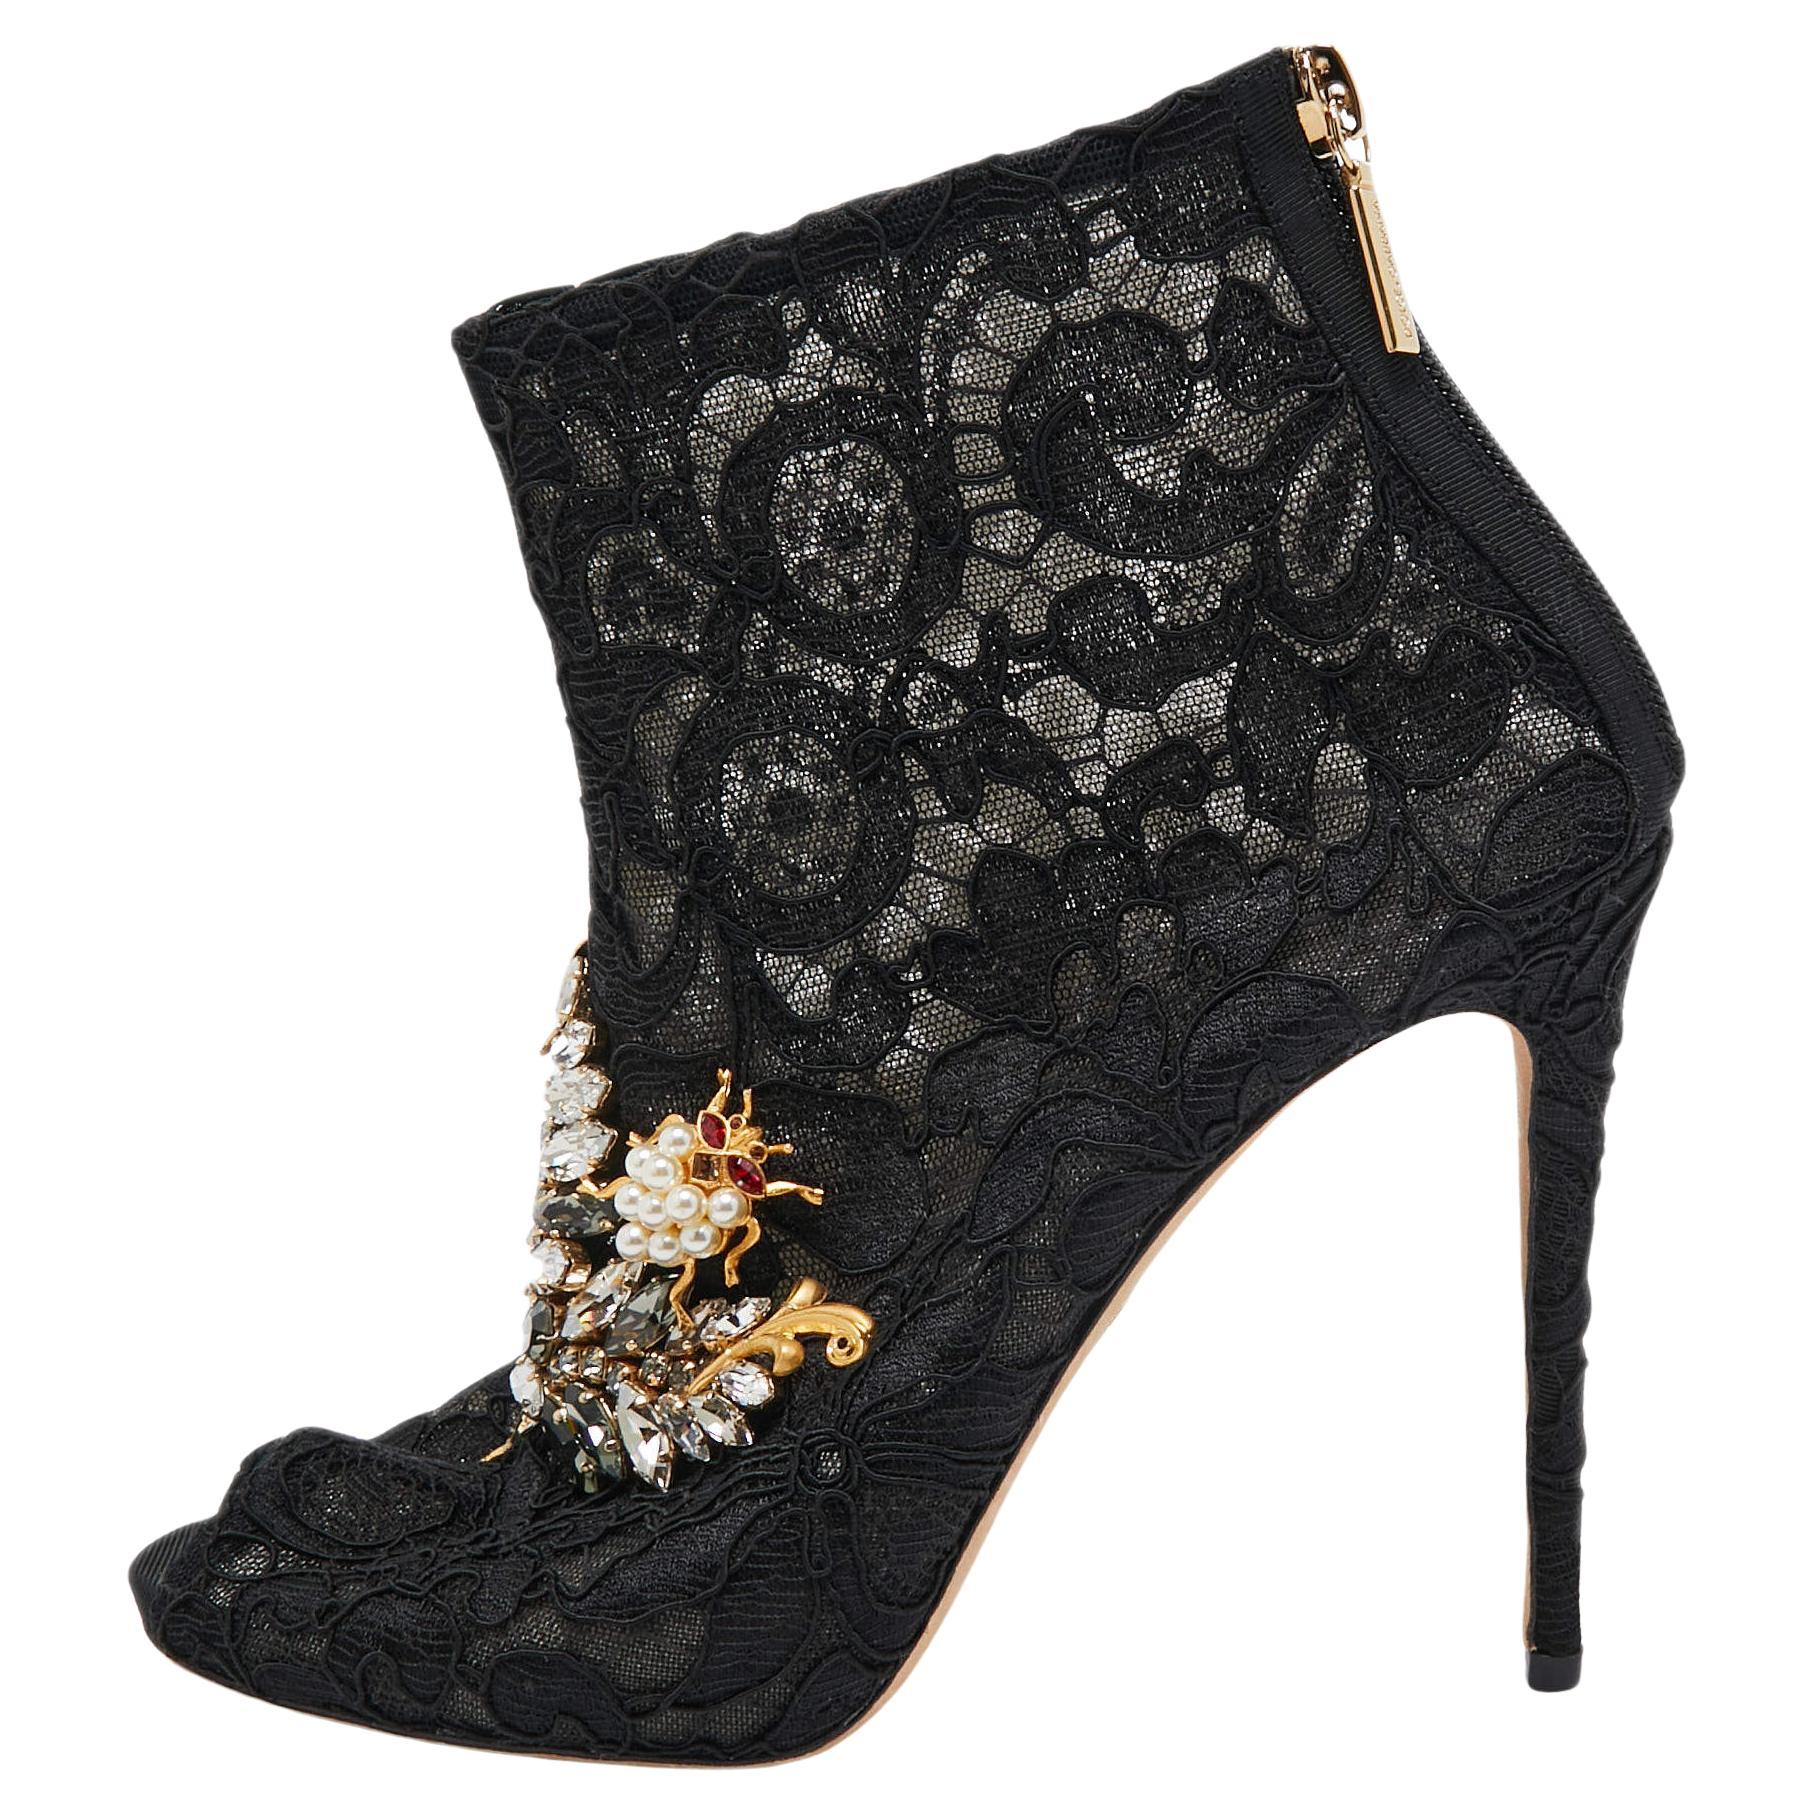 Dolce & Gabbana Black Lace Crystal Embellished Peep Toe Booties Size 37.5 For Sale